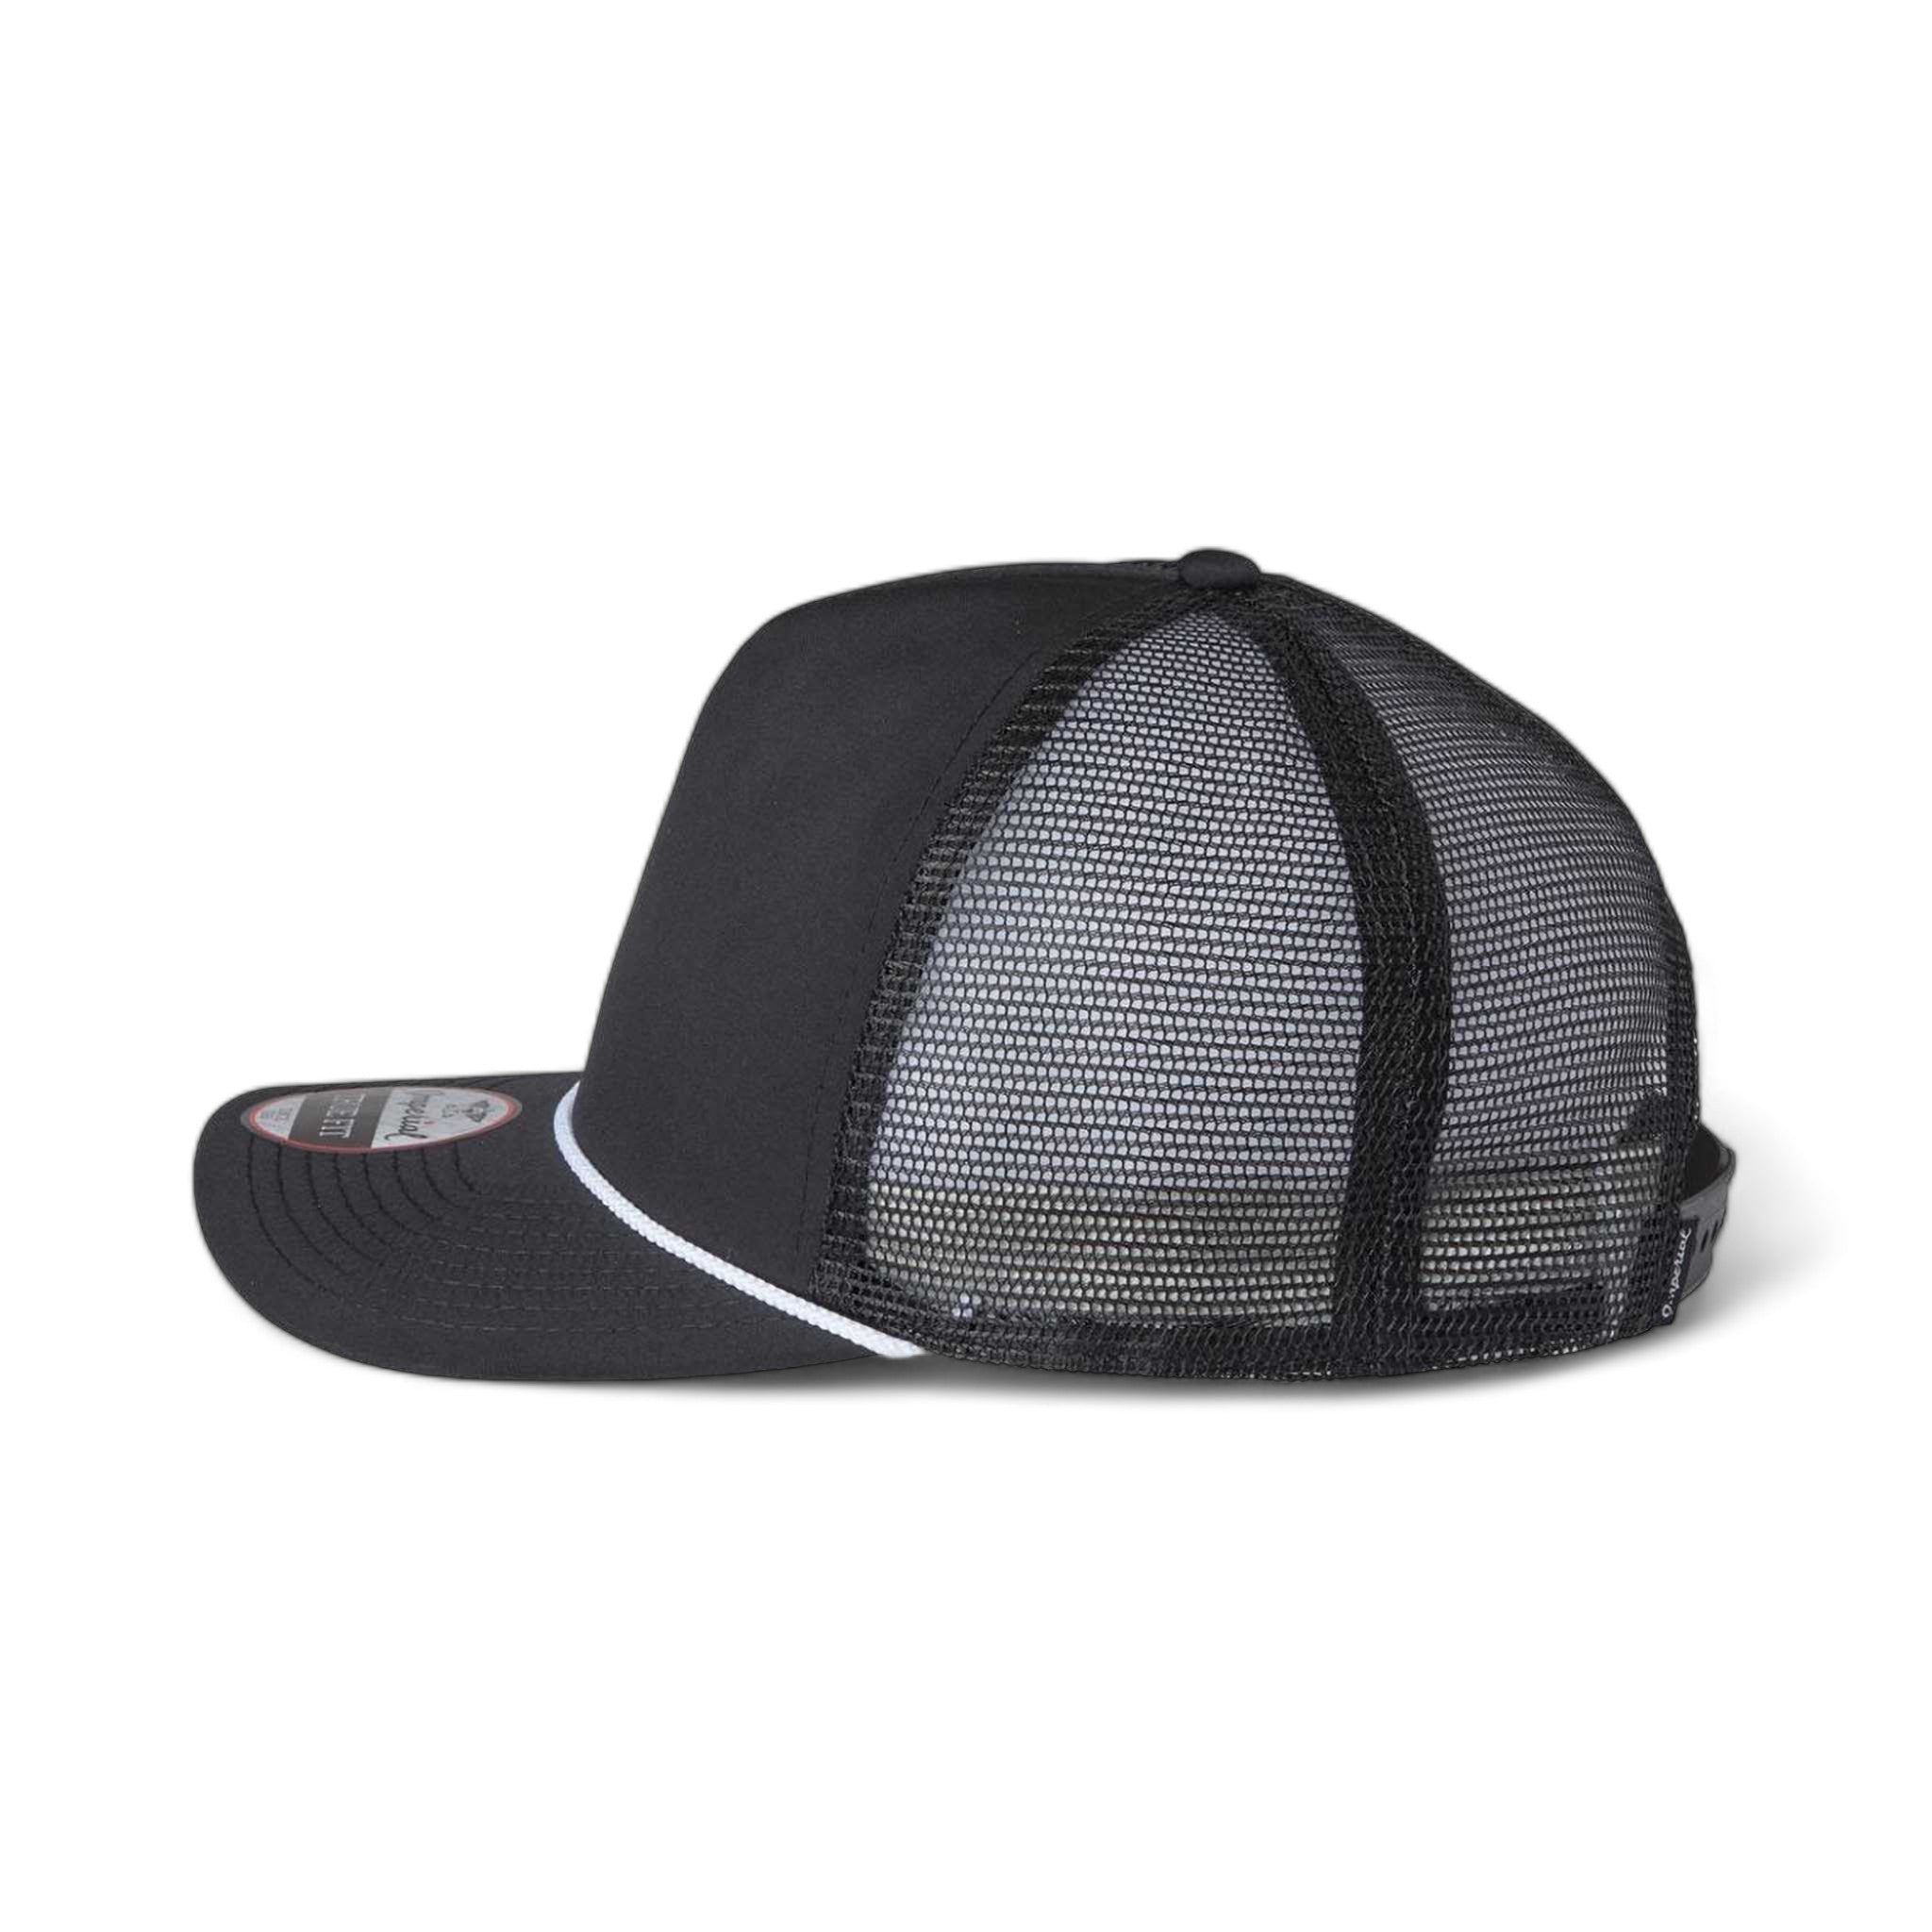 Side view of Imperial 5055 custom hat in black, black and white